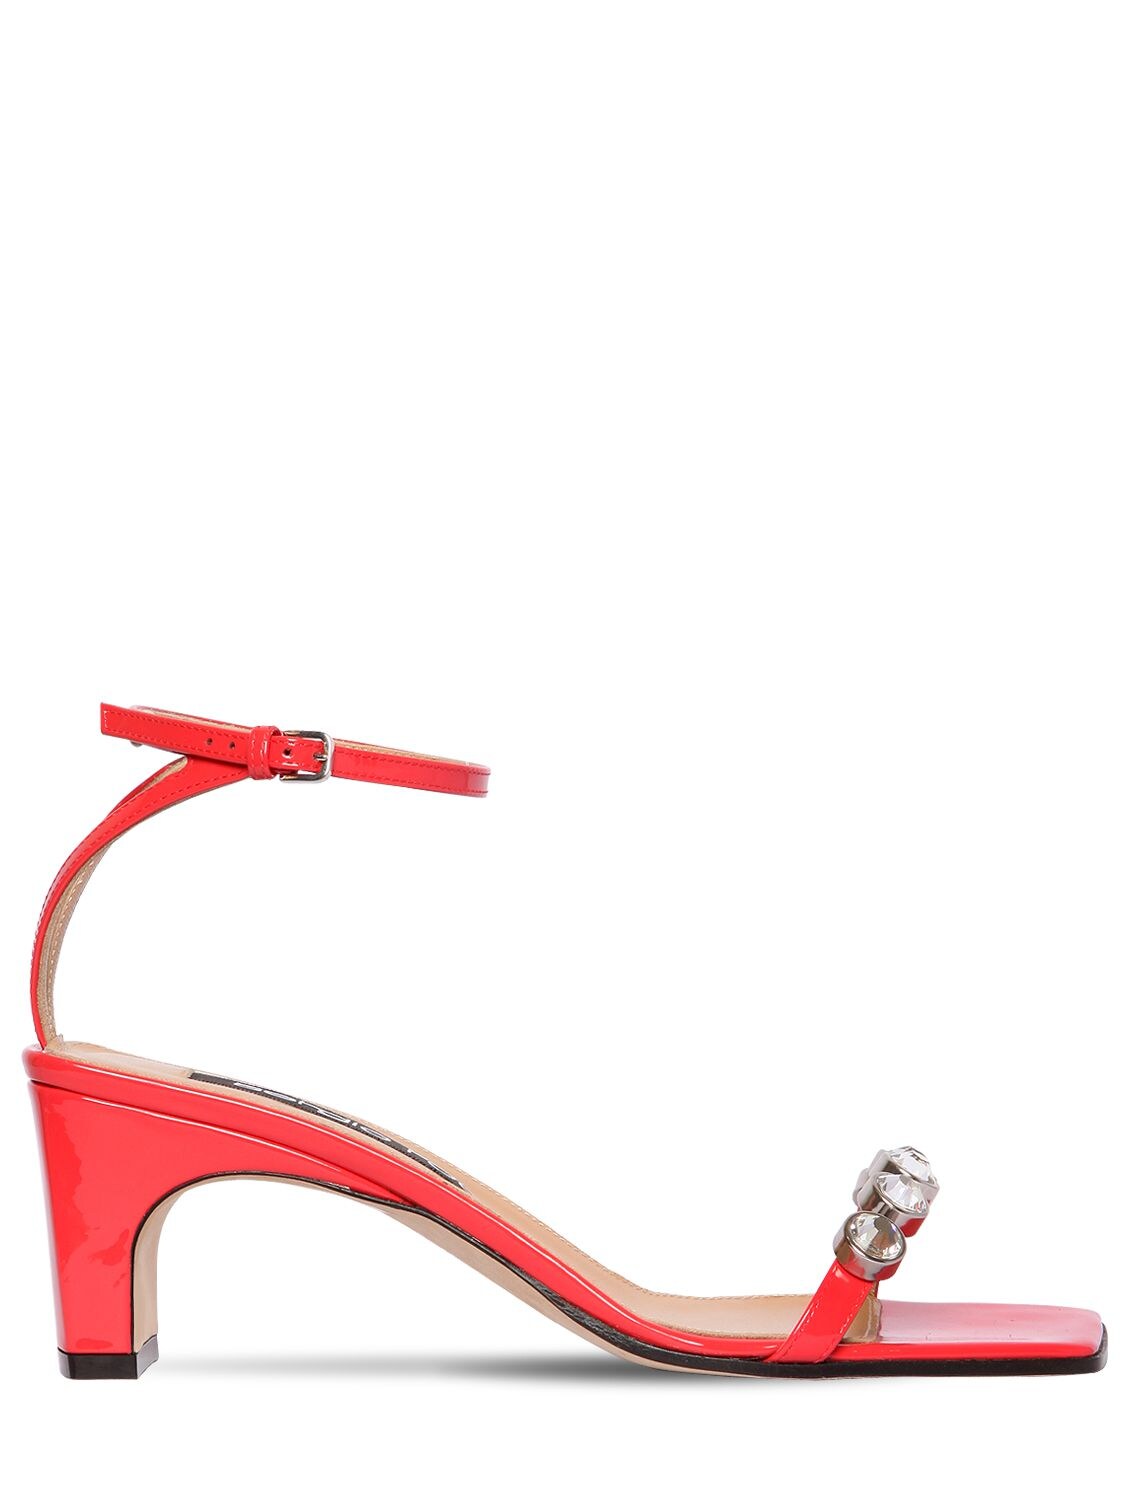 Sergio Rossi 60mm Embellished Patent Leather Sandals In Coral